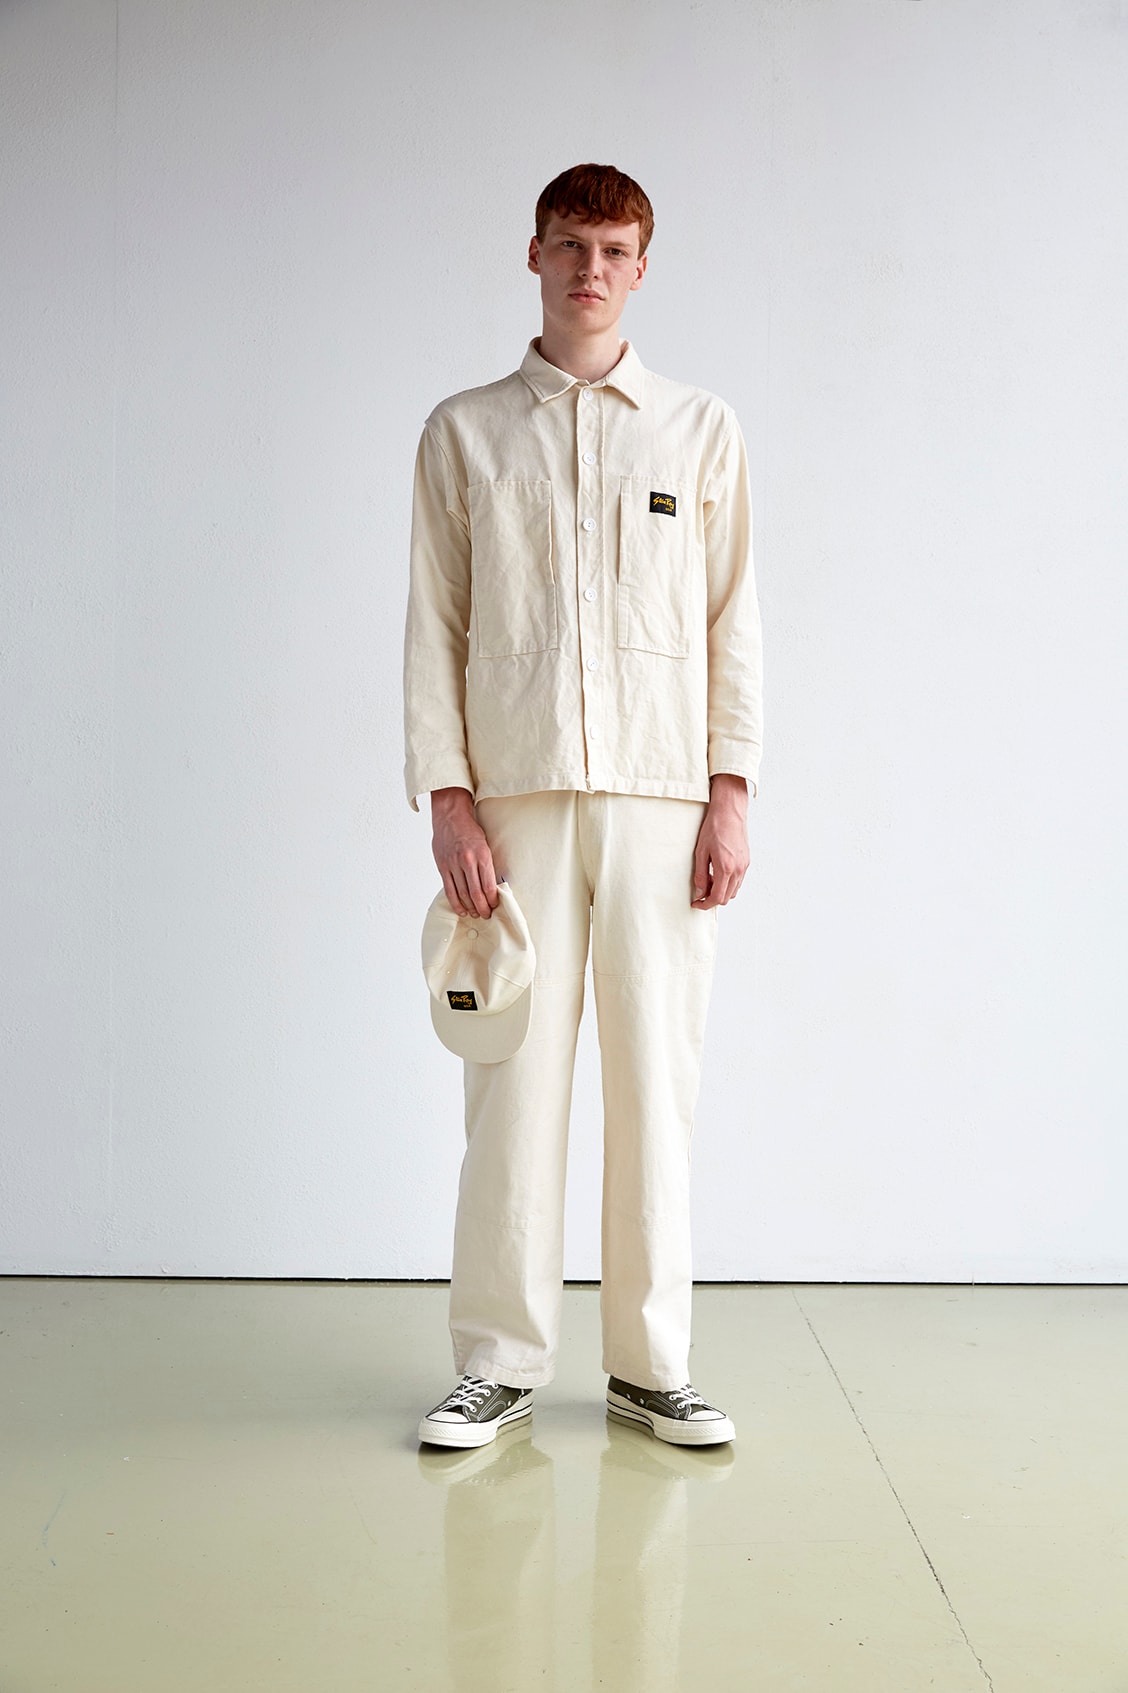 Stan Ray Spring/Summer 2019 Lookbook Collection Shirts Hoodies Jackets Tees T-Shirts Dungarees Overalls Jeans Trousers Pants Patagonia Miles Johnson